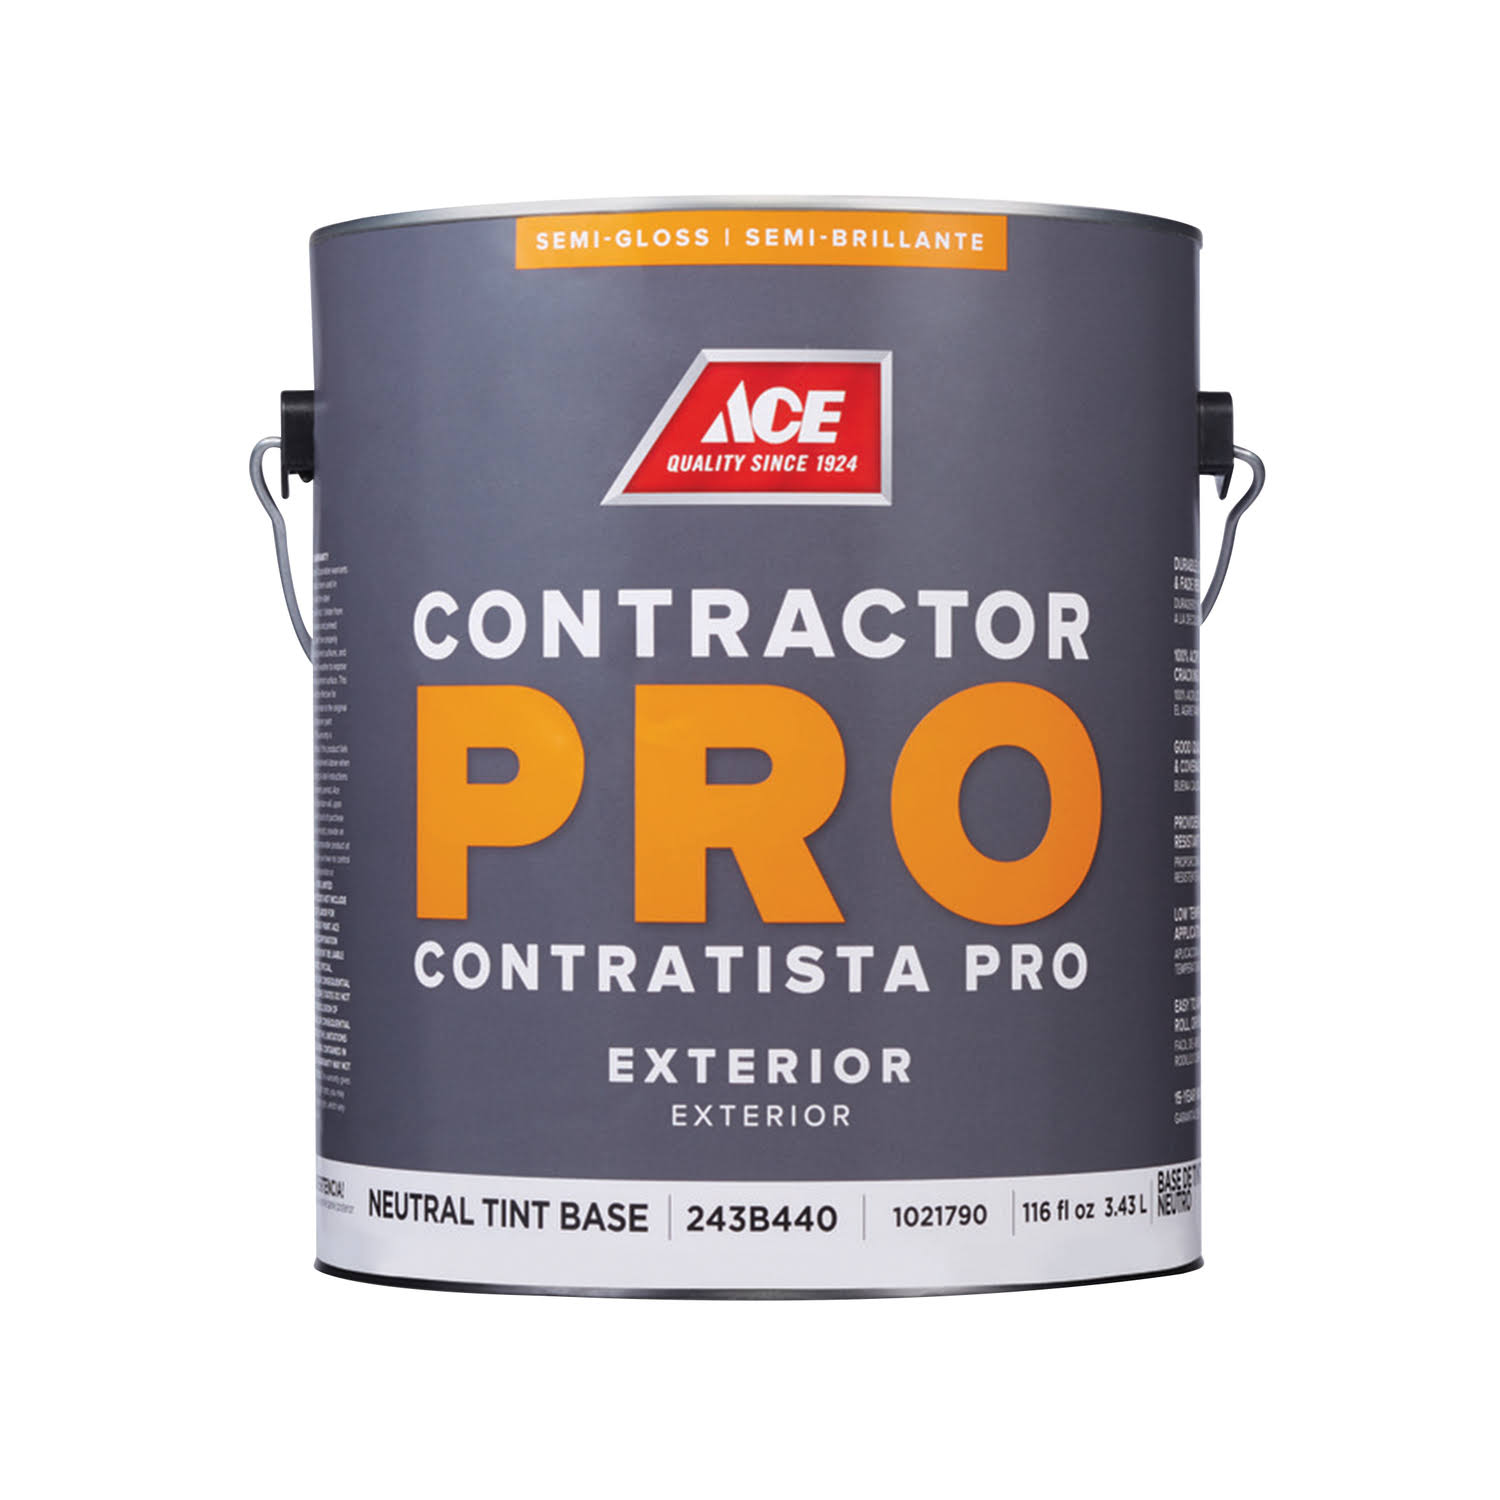 Ace Contractor Pro Semi-Gloss Tint Base Neutral Base Acrylic Latex Paint Exterior 1 gal.